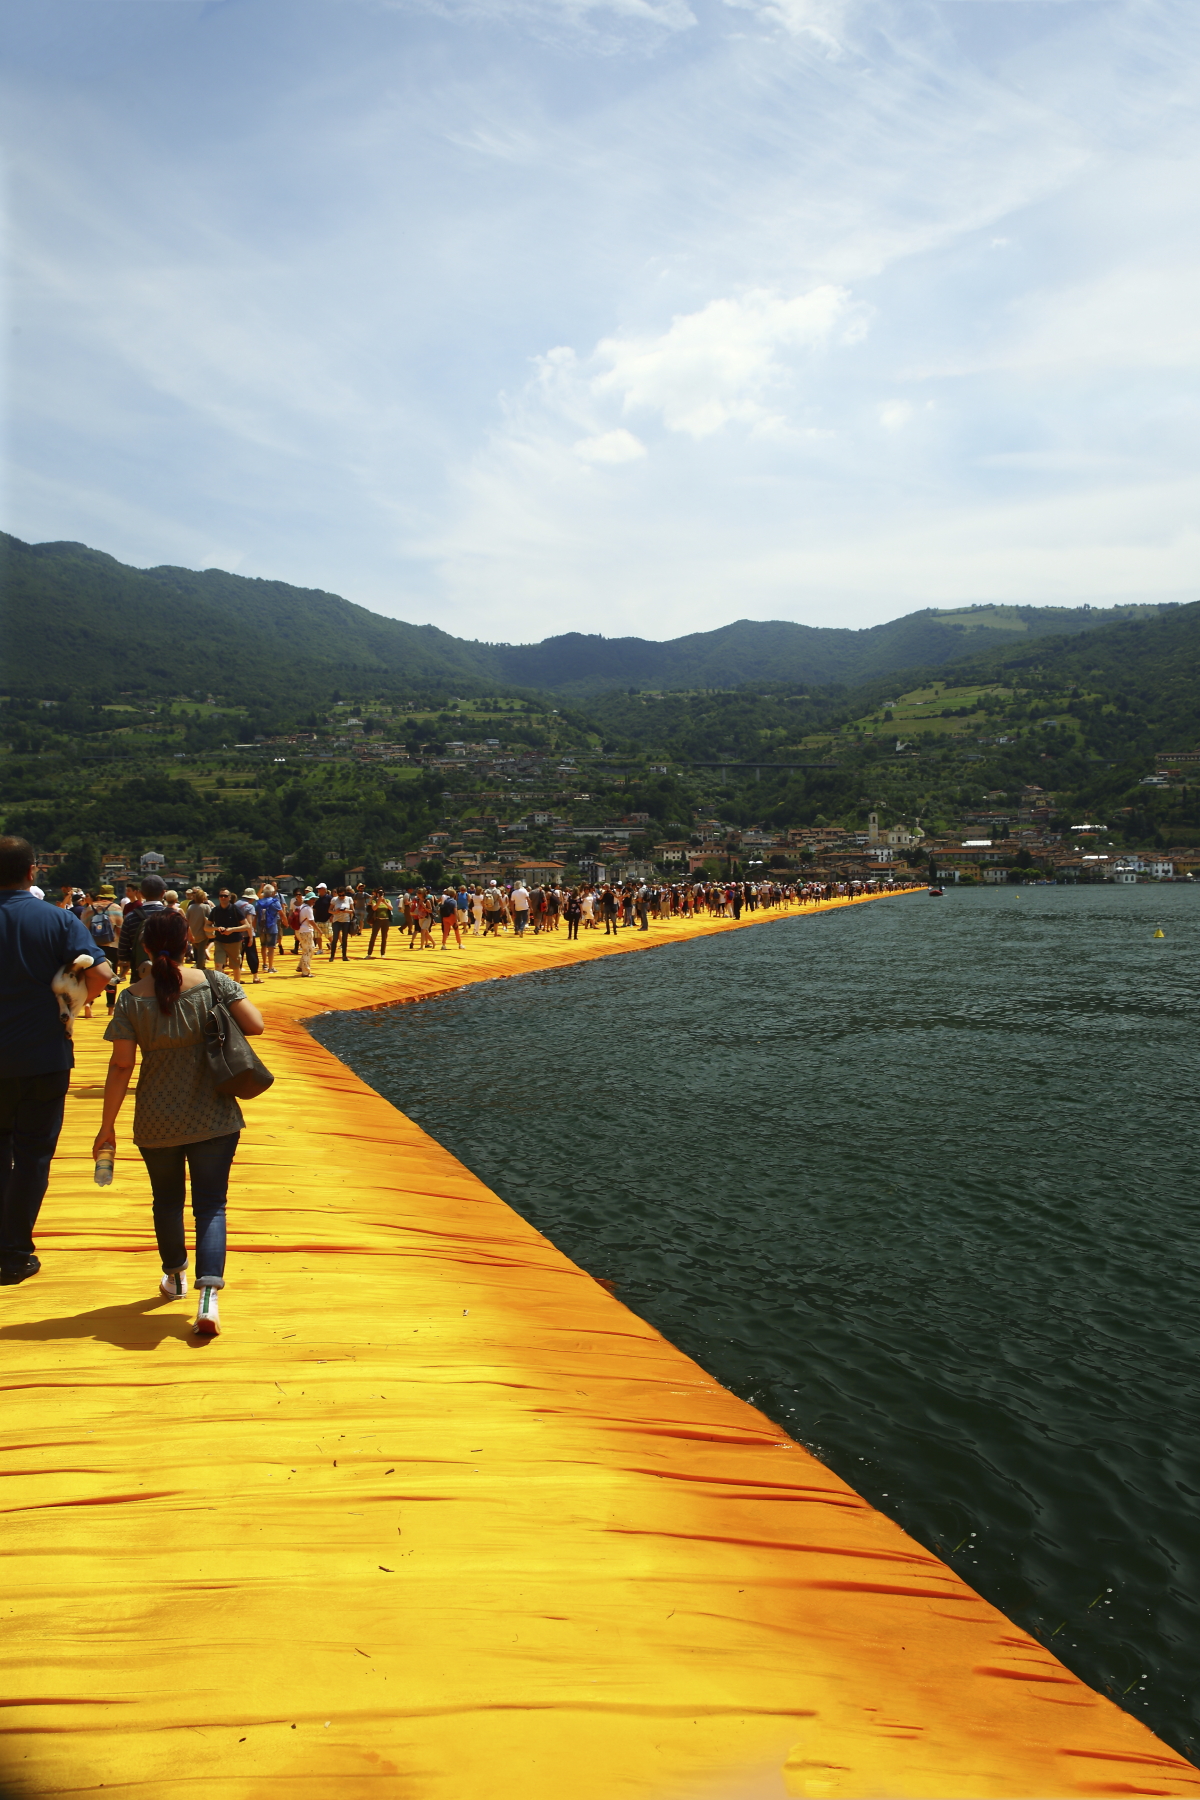 Christo Piers Project at Lake Isseo